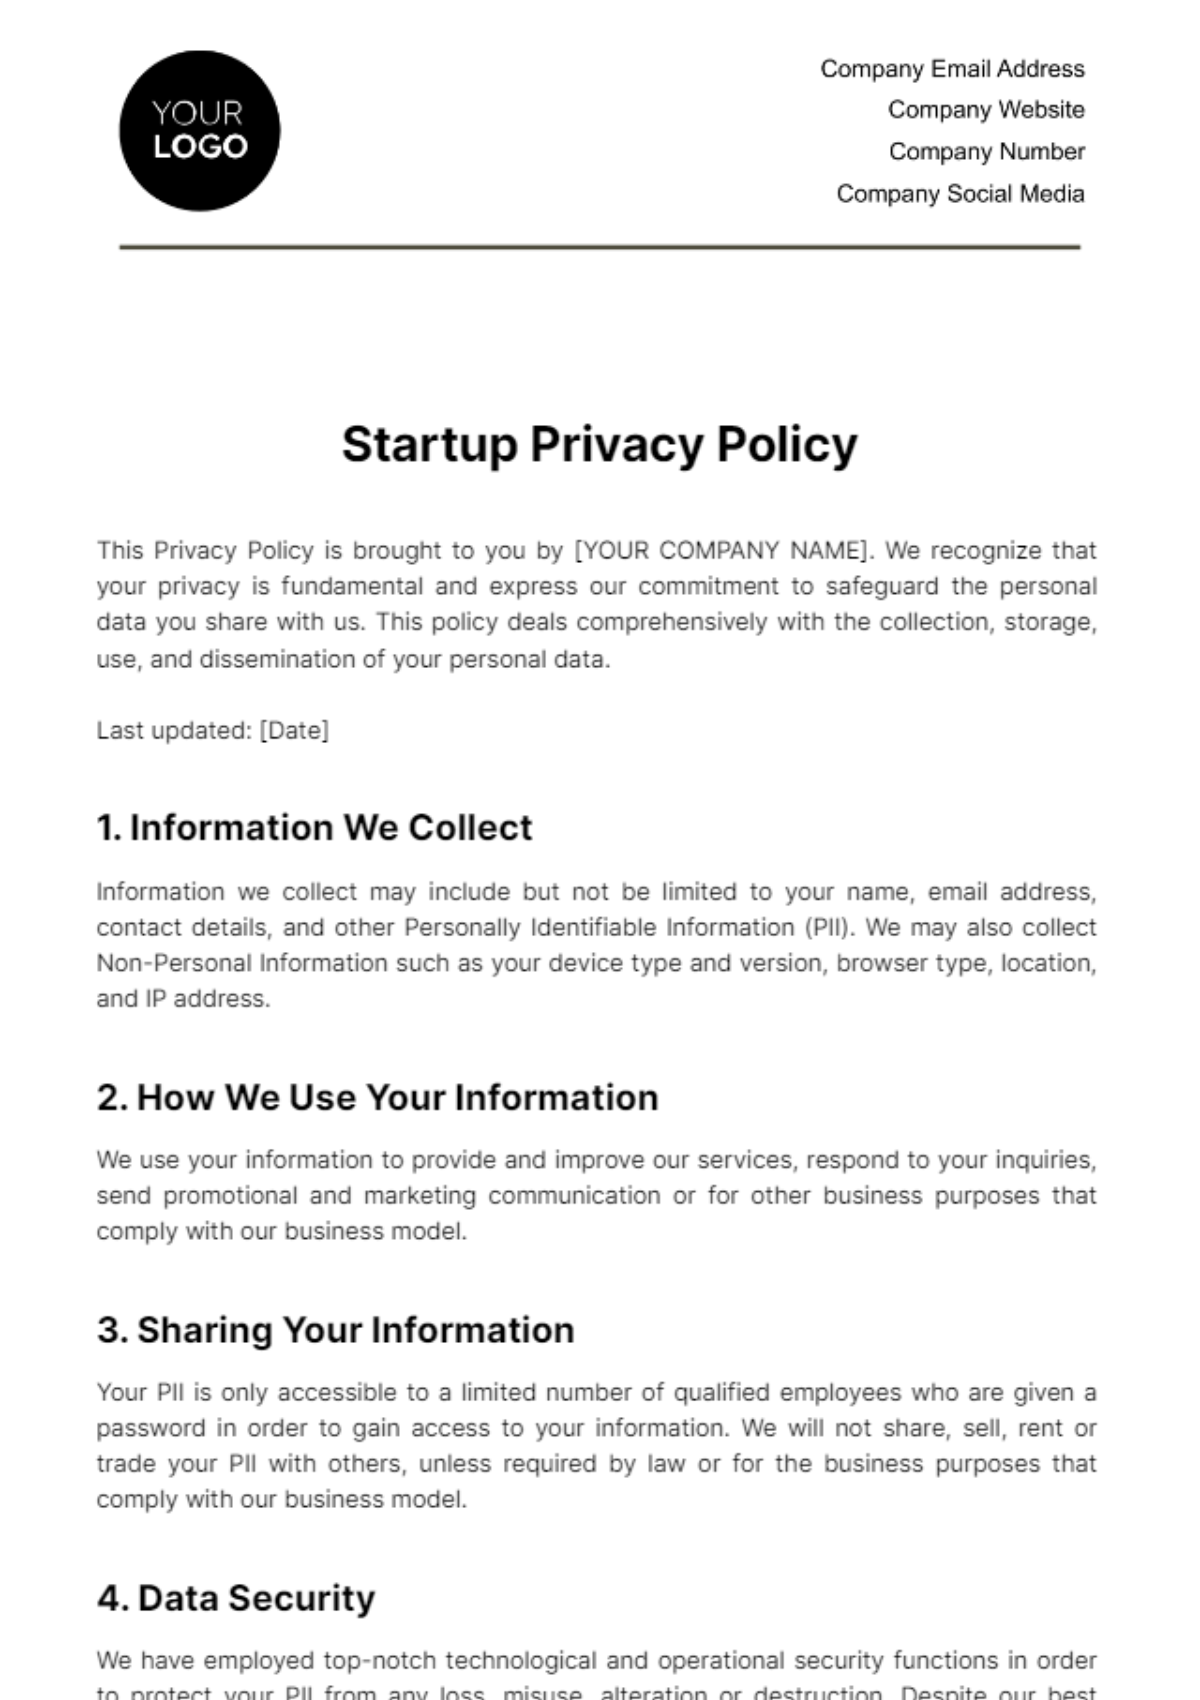 Startup Privacy Policy Template